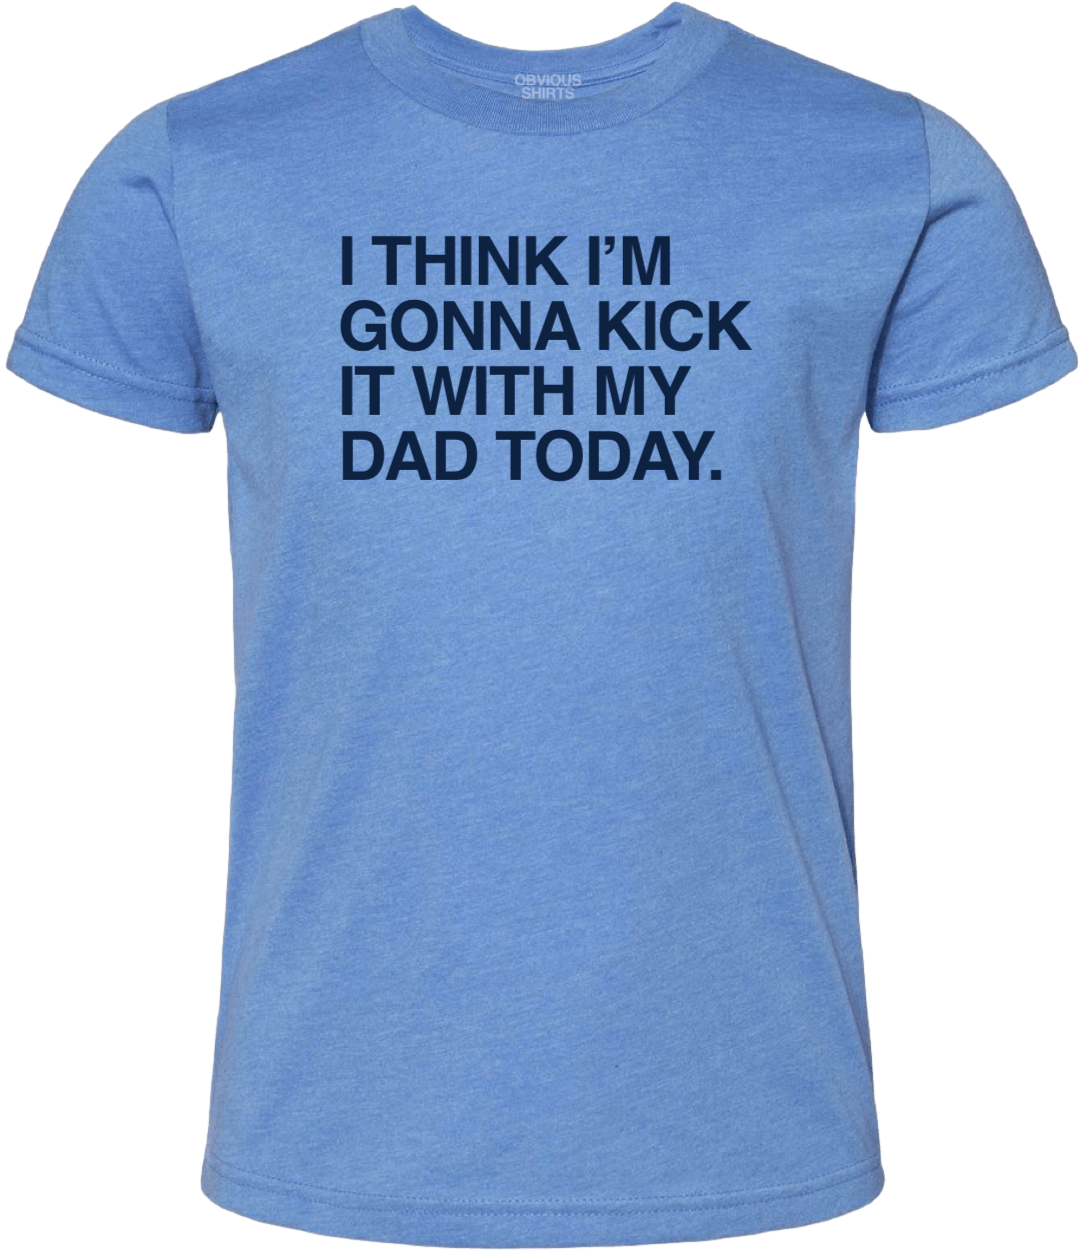 I THINK I'M GONNA KICK IT WITH DAD TODAY. (YOUTH) - OBVIOUS SHIRTS